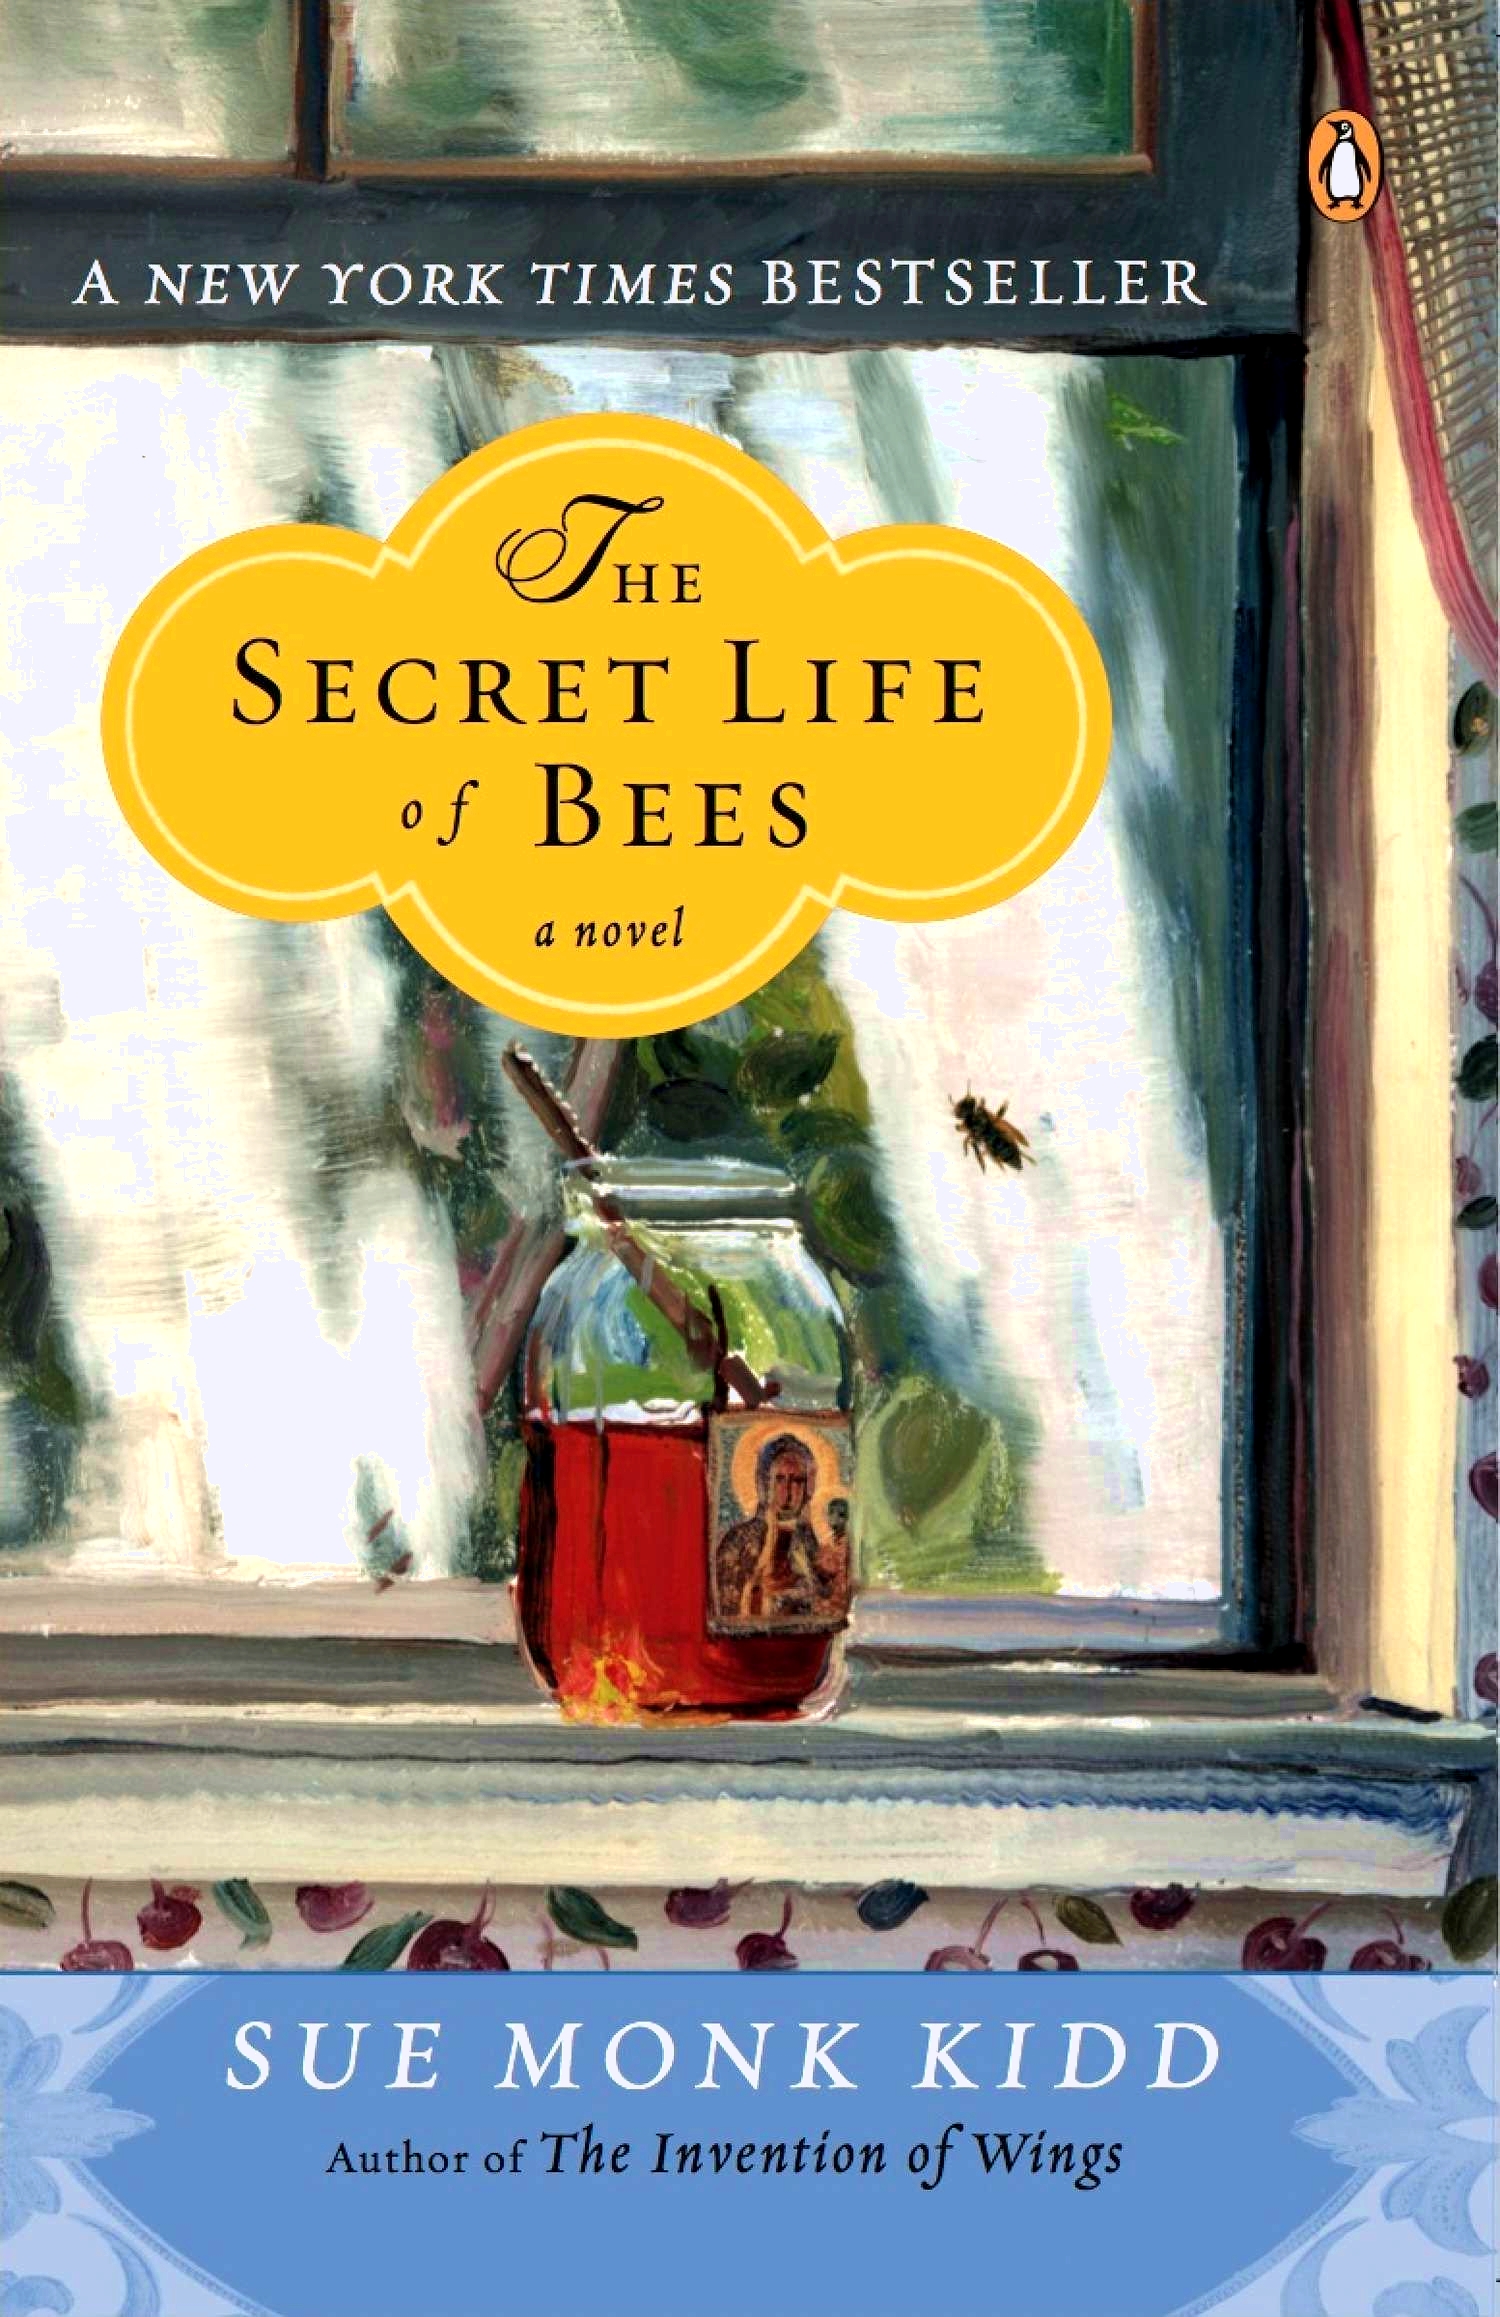 Book Club reads "The Secret Life Of Bees"